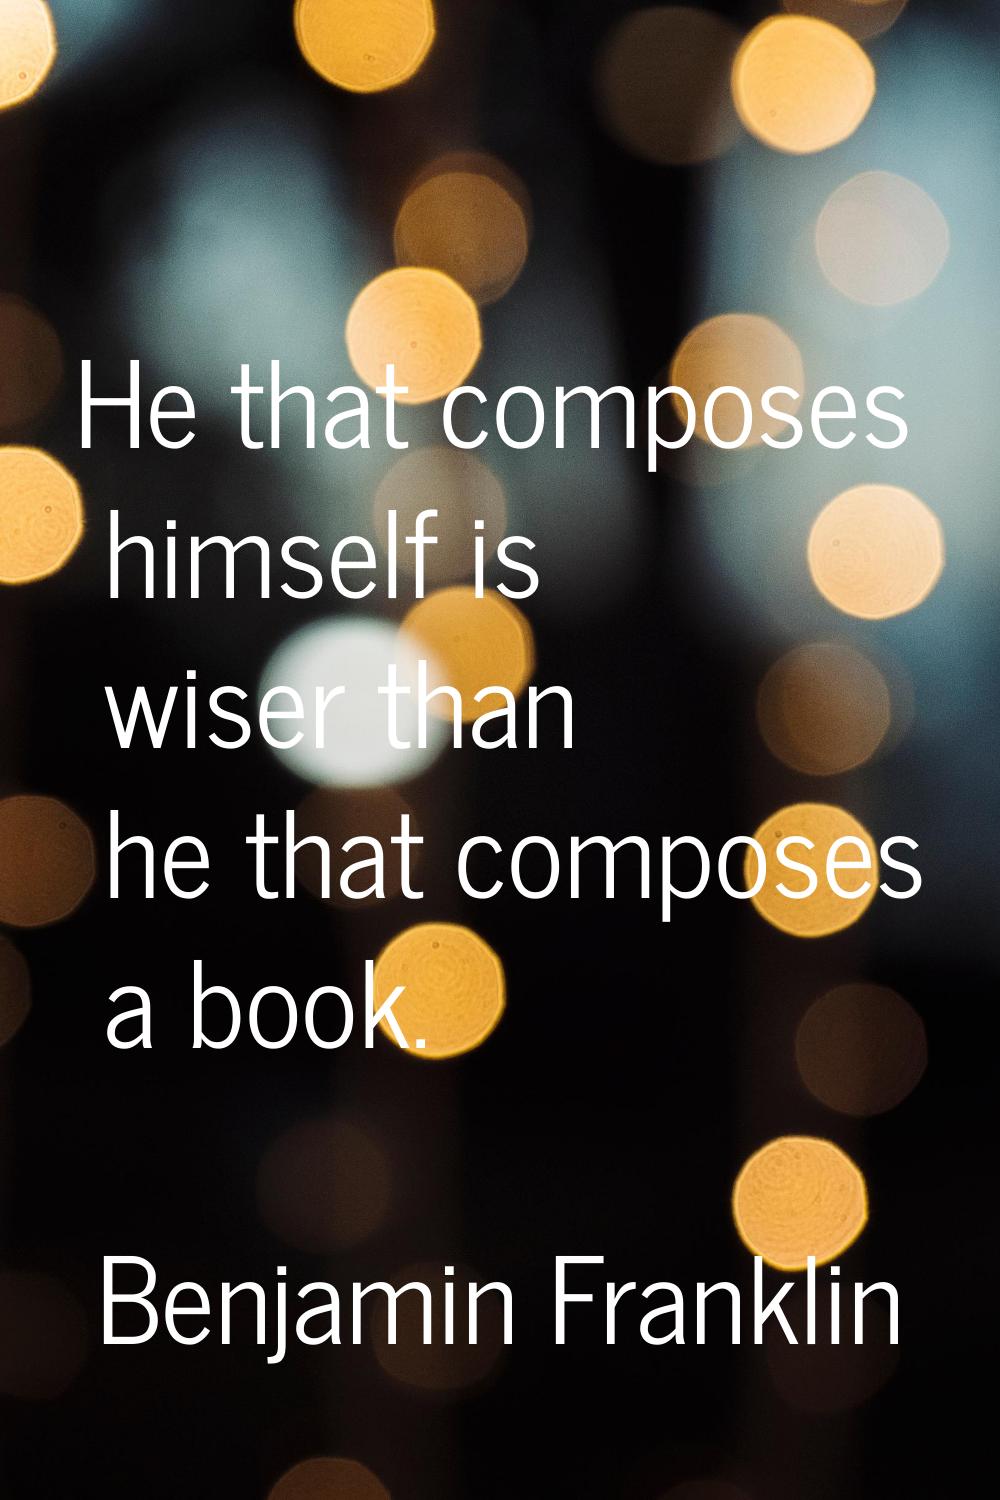 He that composes himself is wiser than he that composes a book.